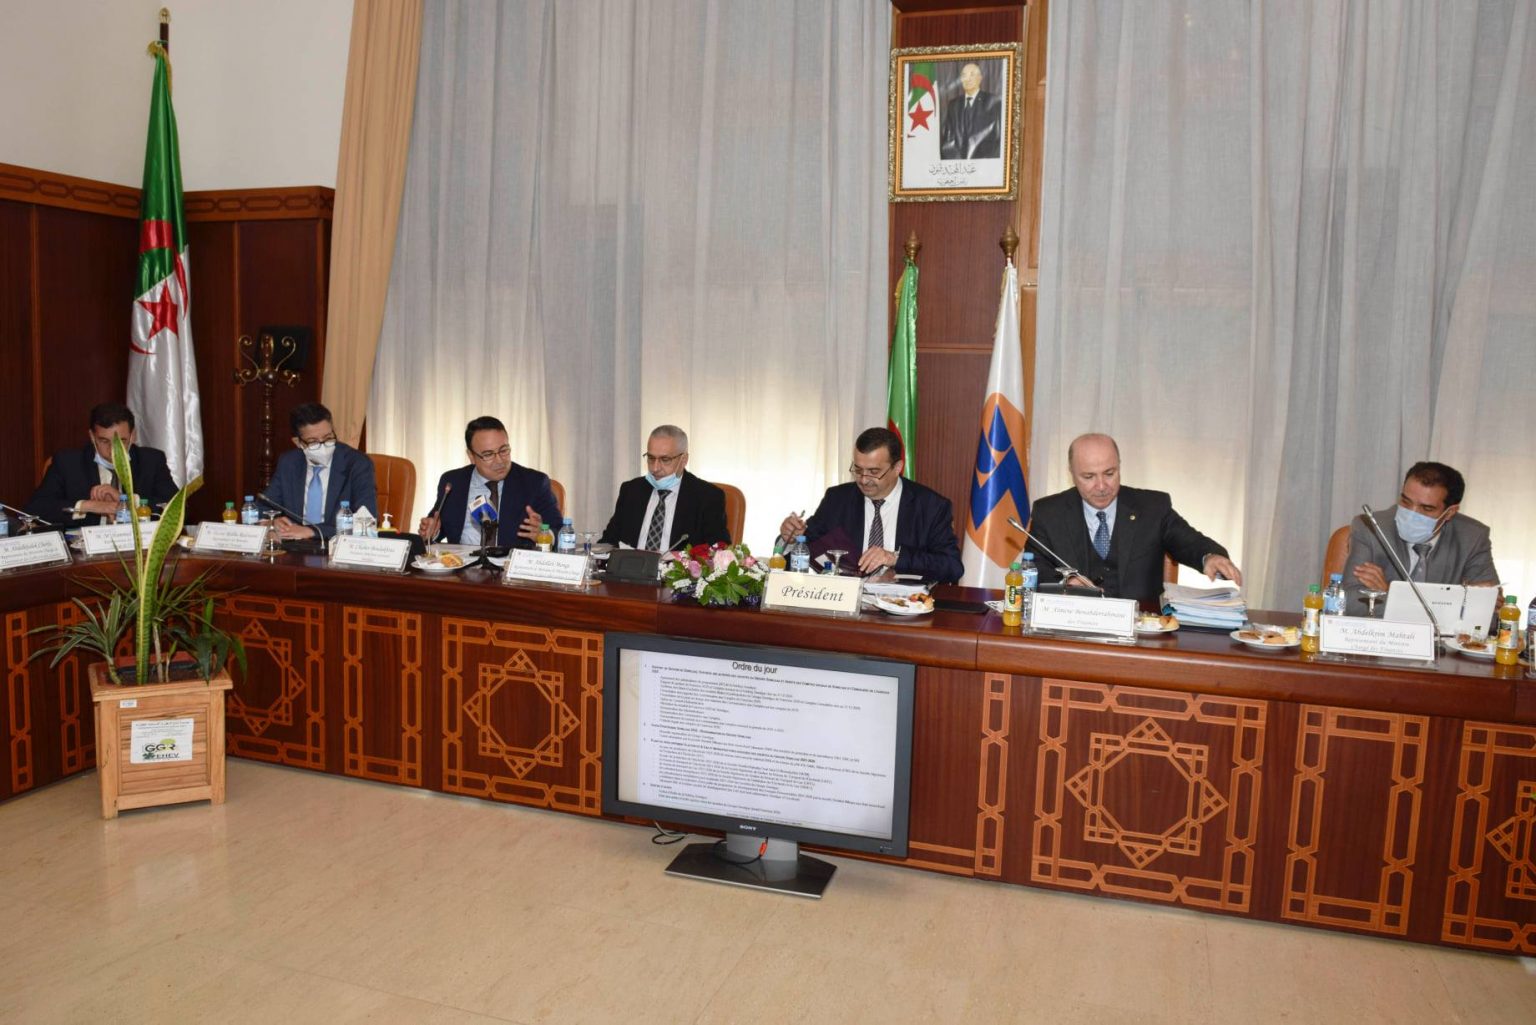 Arkab chairs the Ordinary General Assembly of the Sonelgaz Complex - Al-Hiwar Algeria